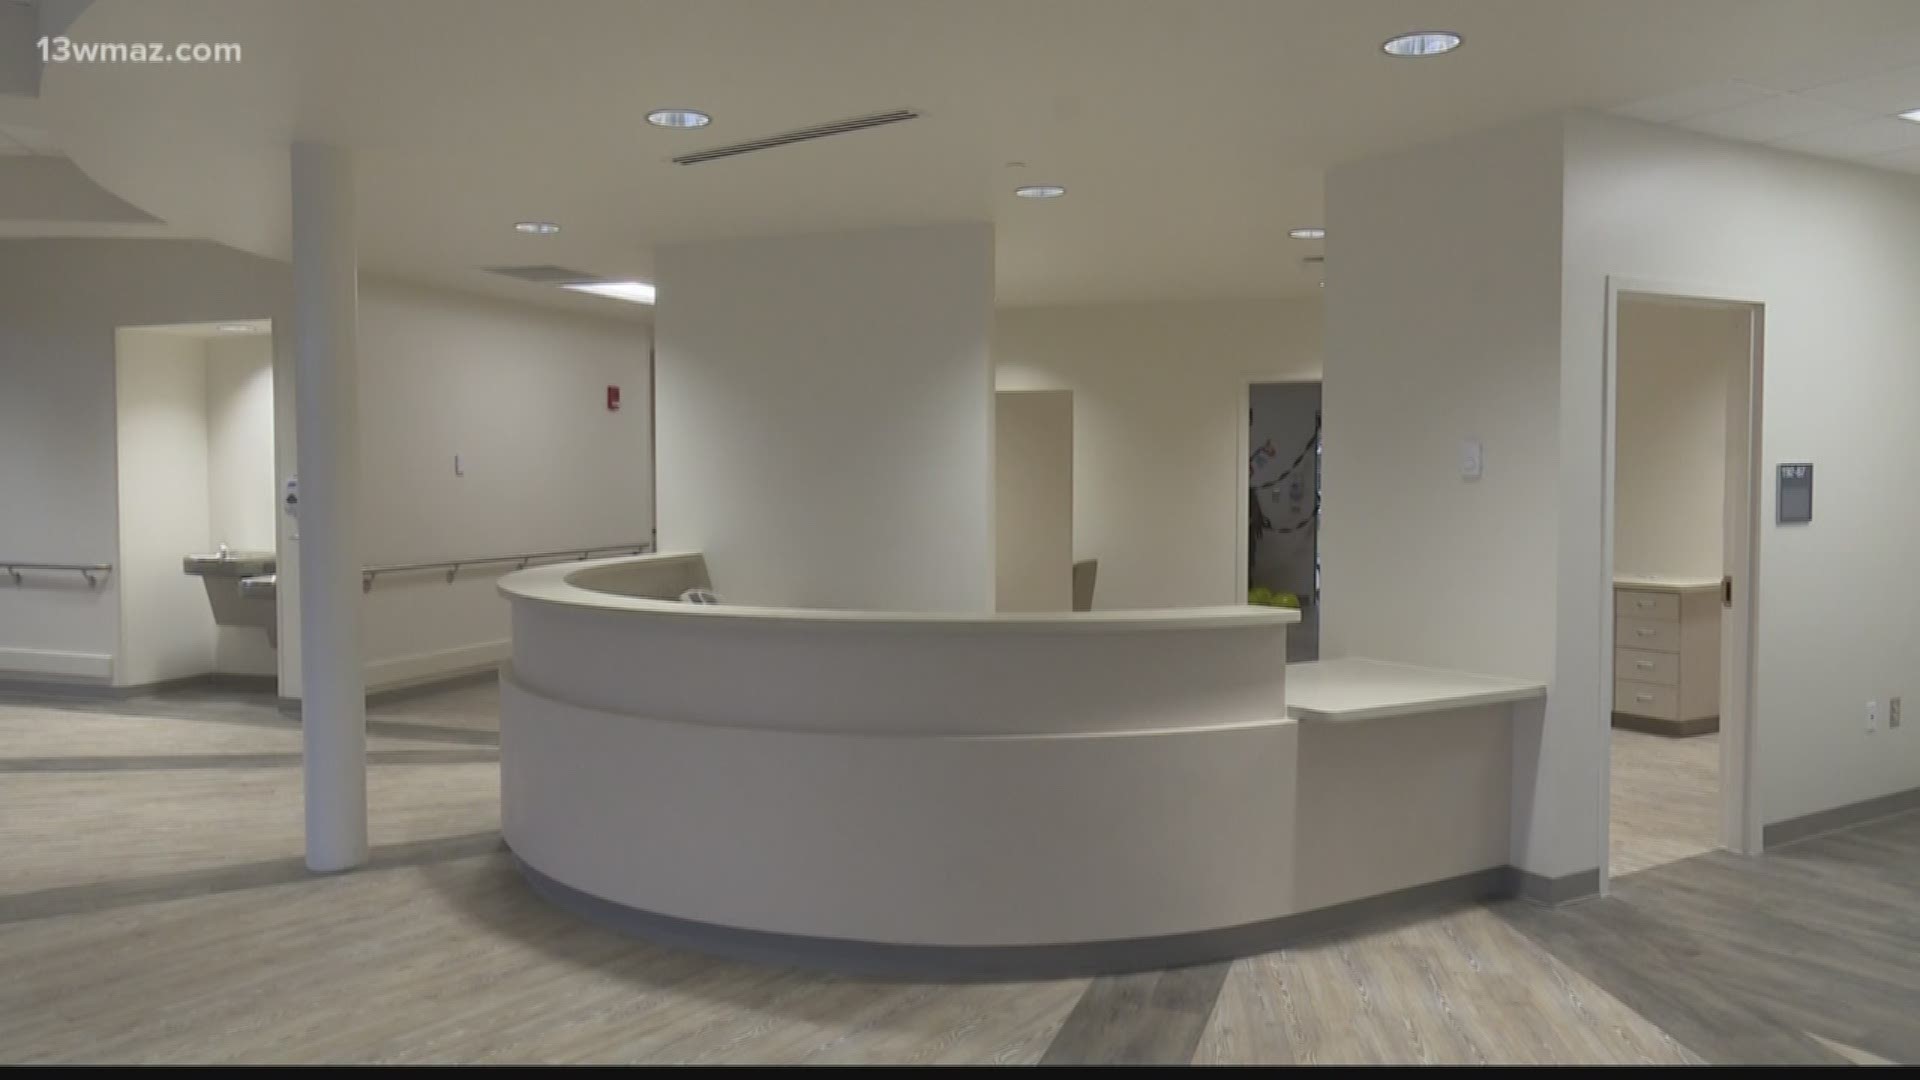 The Carl Vinson VA Medical Center has completed their new outpatient mental health facility as a part of their 'Mission Act.'